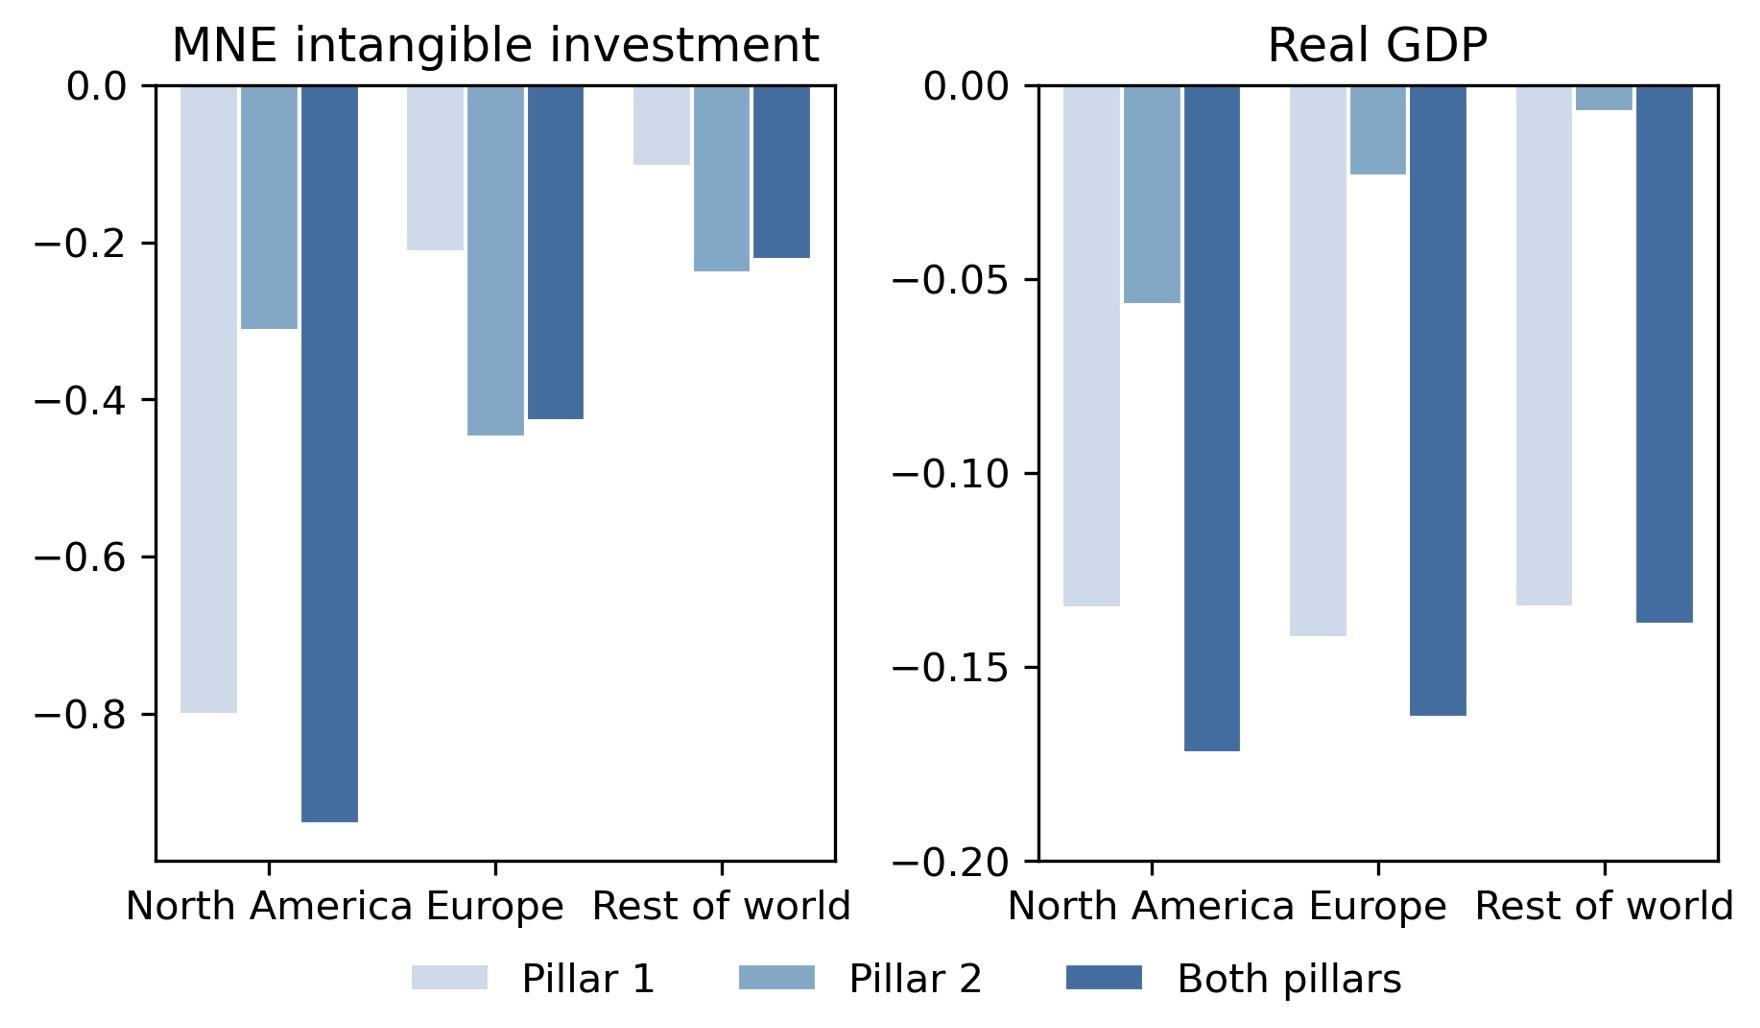 Figure 2 Effects of OECD/G20 BEPS framework on intangible investment and GDP (measured in percent changes)